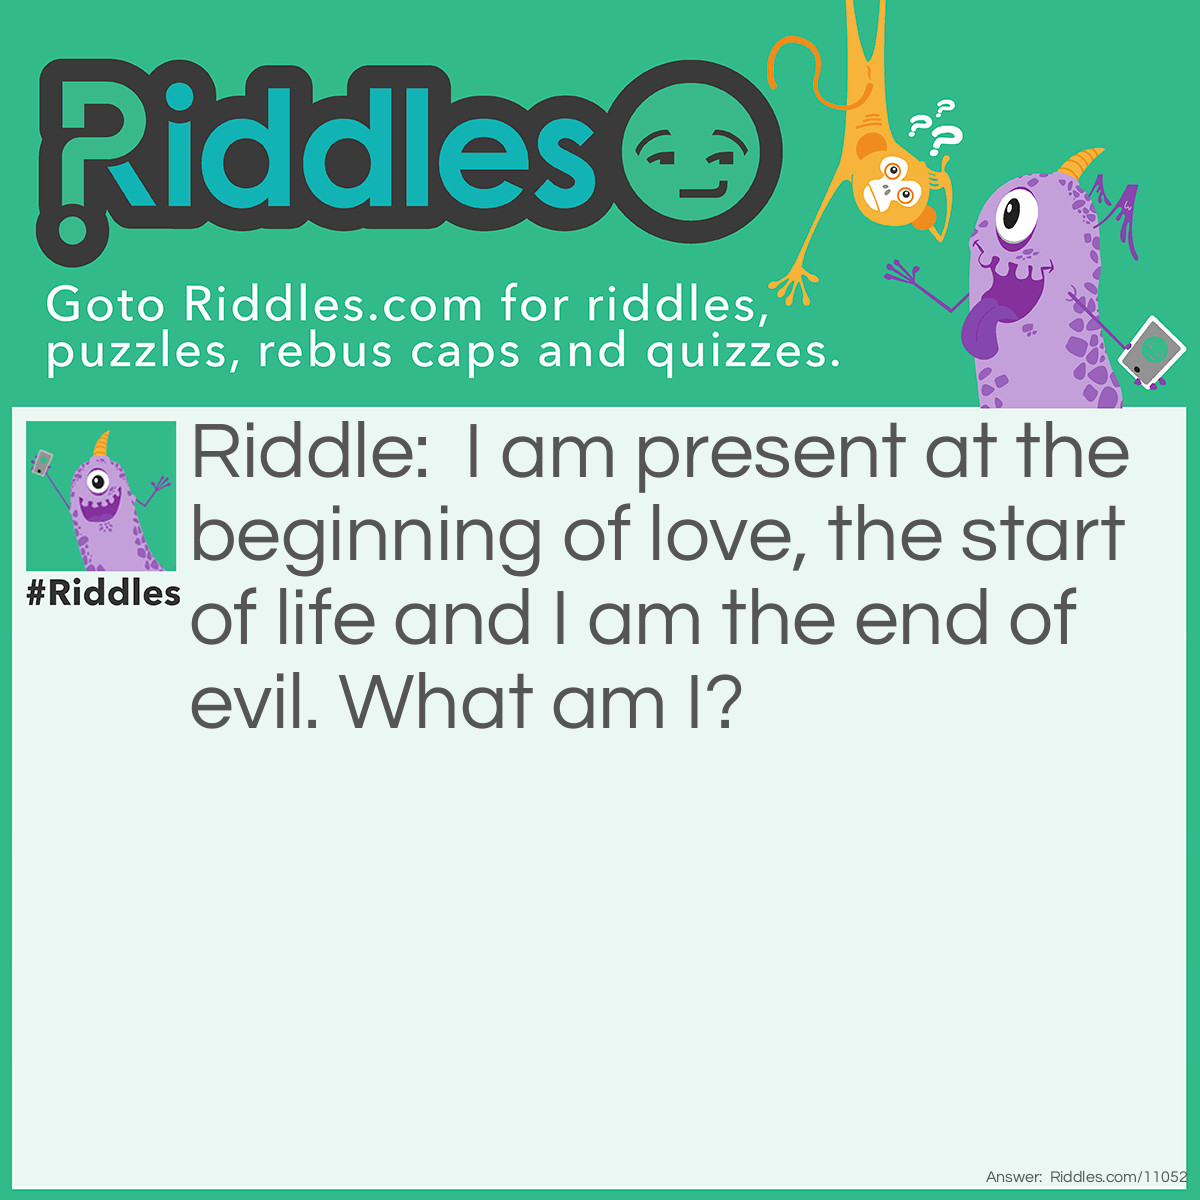 Riddle: I am present at the beginning of love, the start of life and I am the end of evil. What am I? Answer: The letter 'L'.